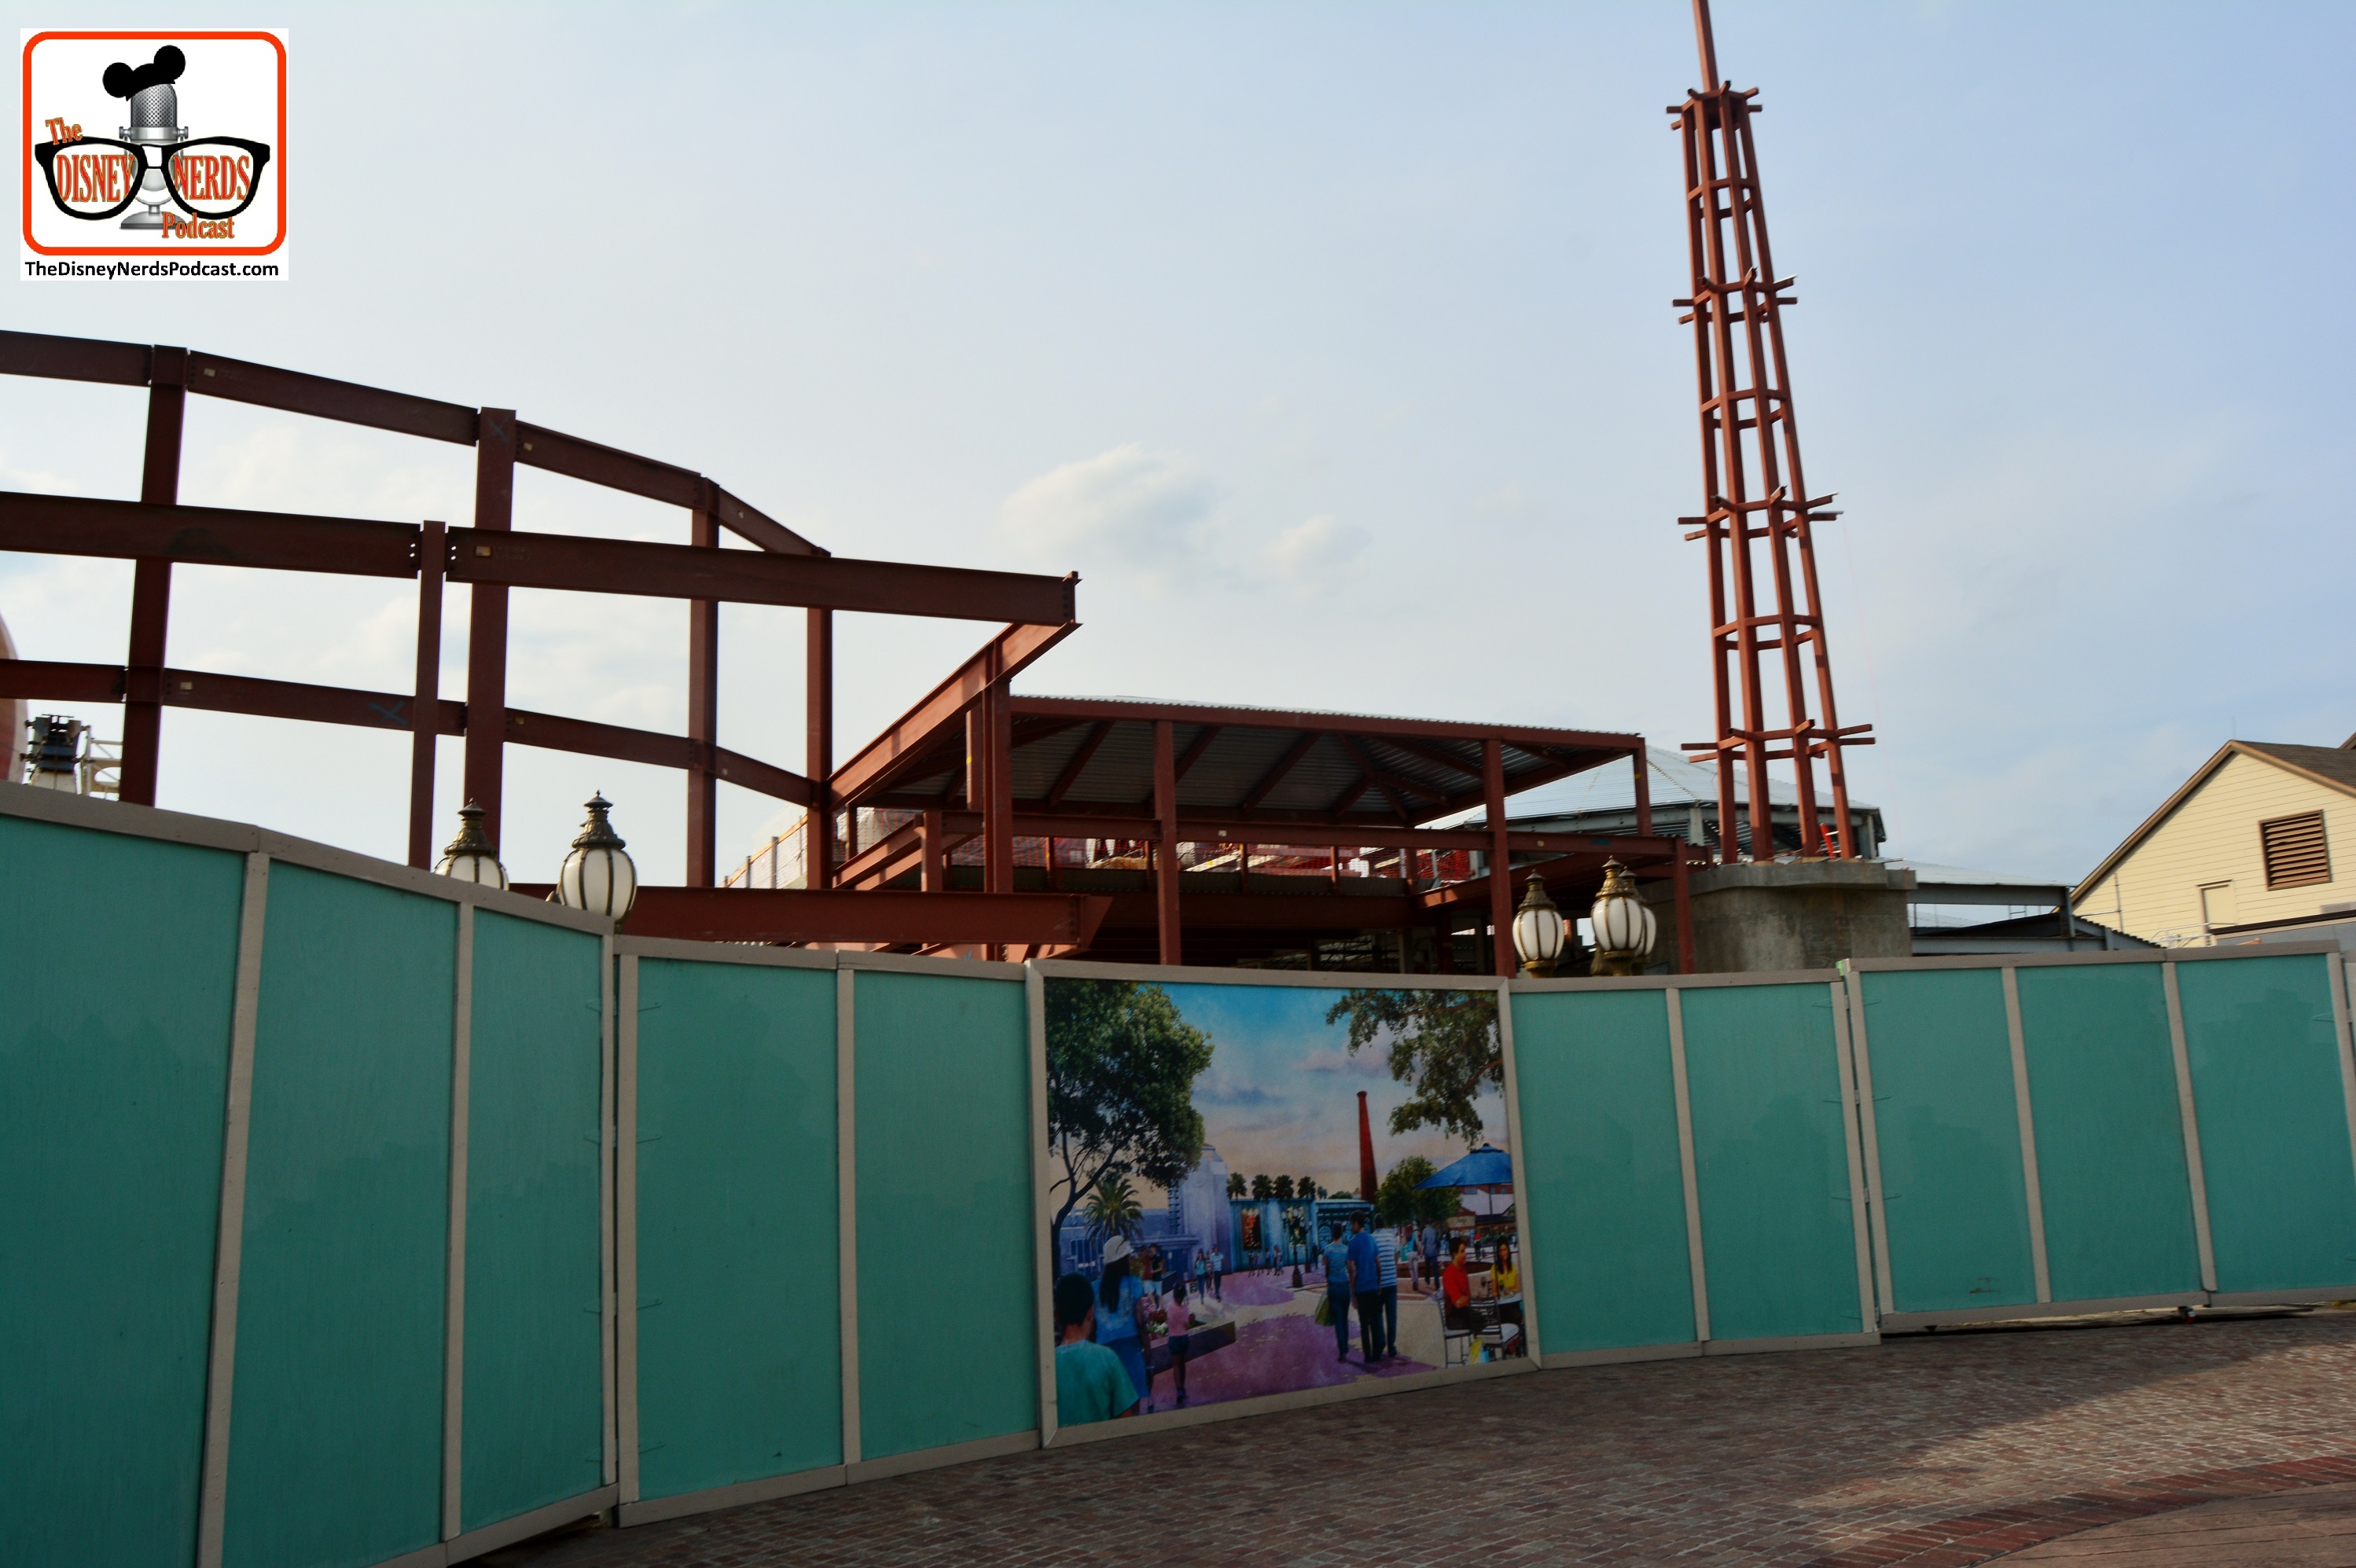 DNP April 2016 Photo Report: Disney Springs: Construction continues to transform into Disney Springs